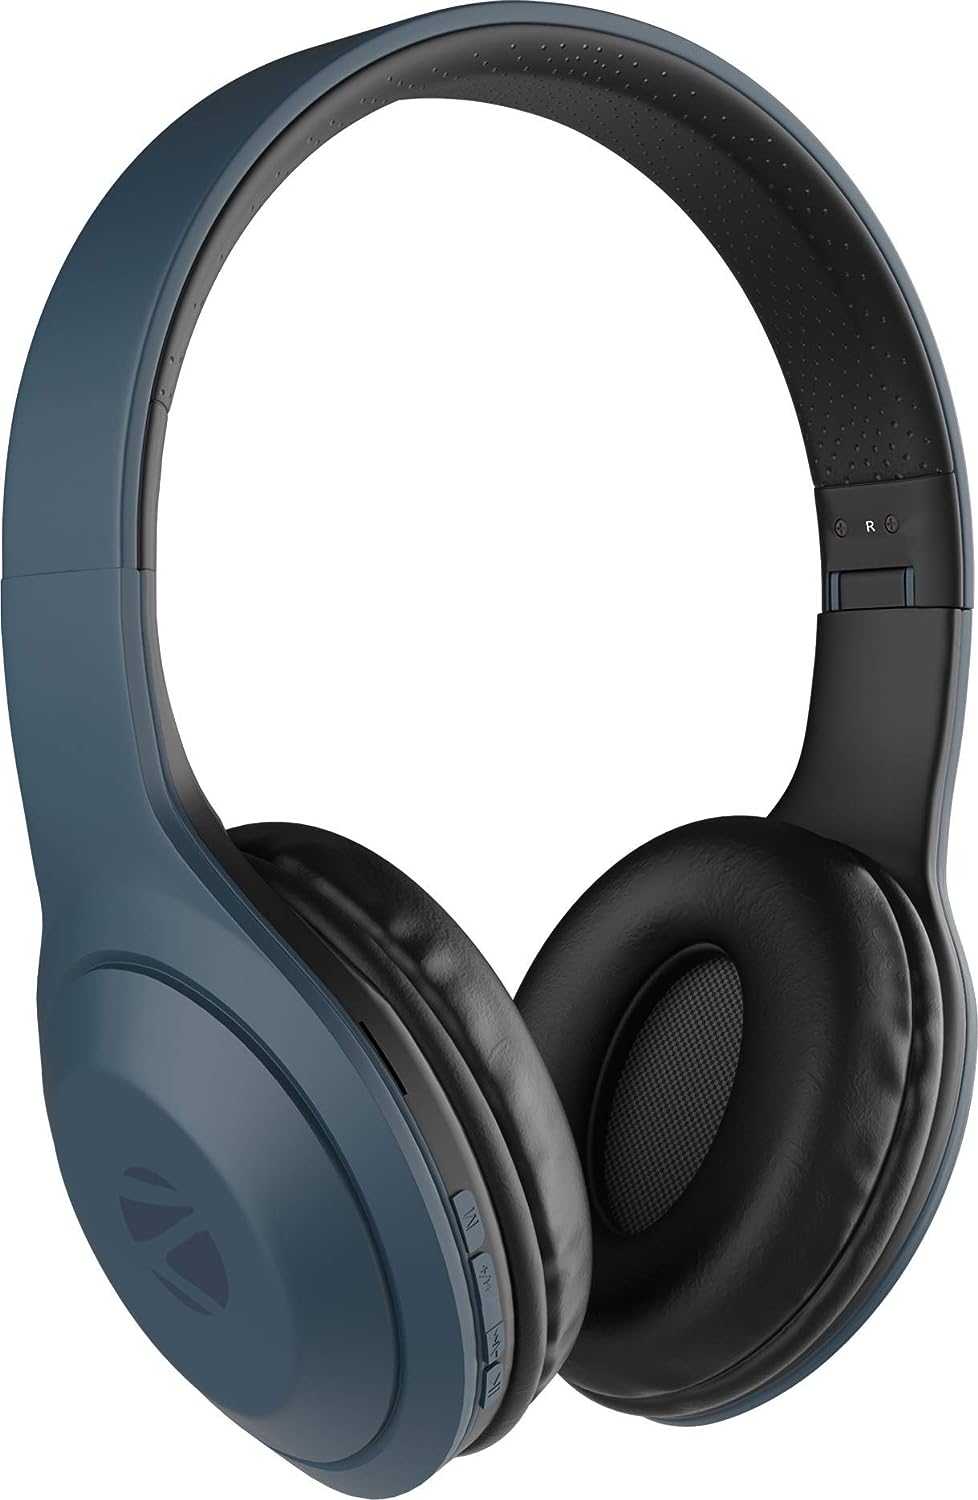 ZEBRONICS Zeb Duke 101 (Blue) Wireless Headphone with Mic, Supporting Bluetooth 5.0, AUX Input Wired Mode, mSD Card Slot, Dual Pairing, On Ear & FM,12 hrs Play Back time, Media/Call Controls